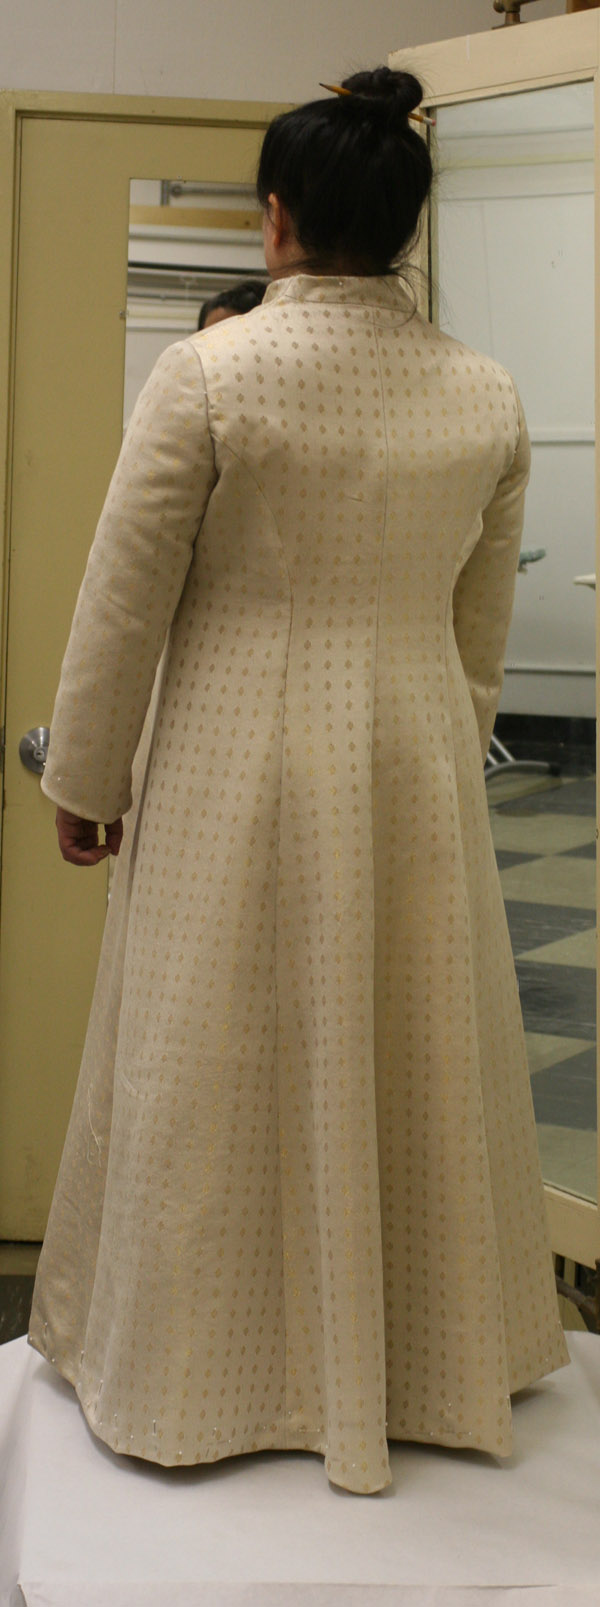 Rear view of the partially finished handwoven wedding coat